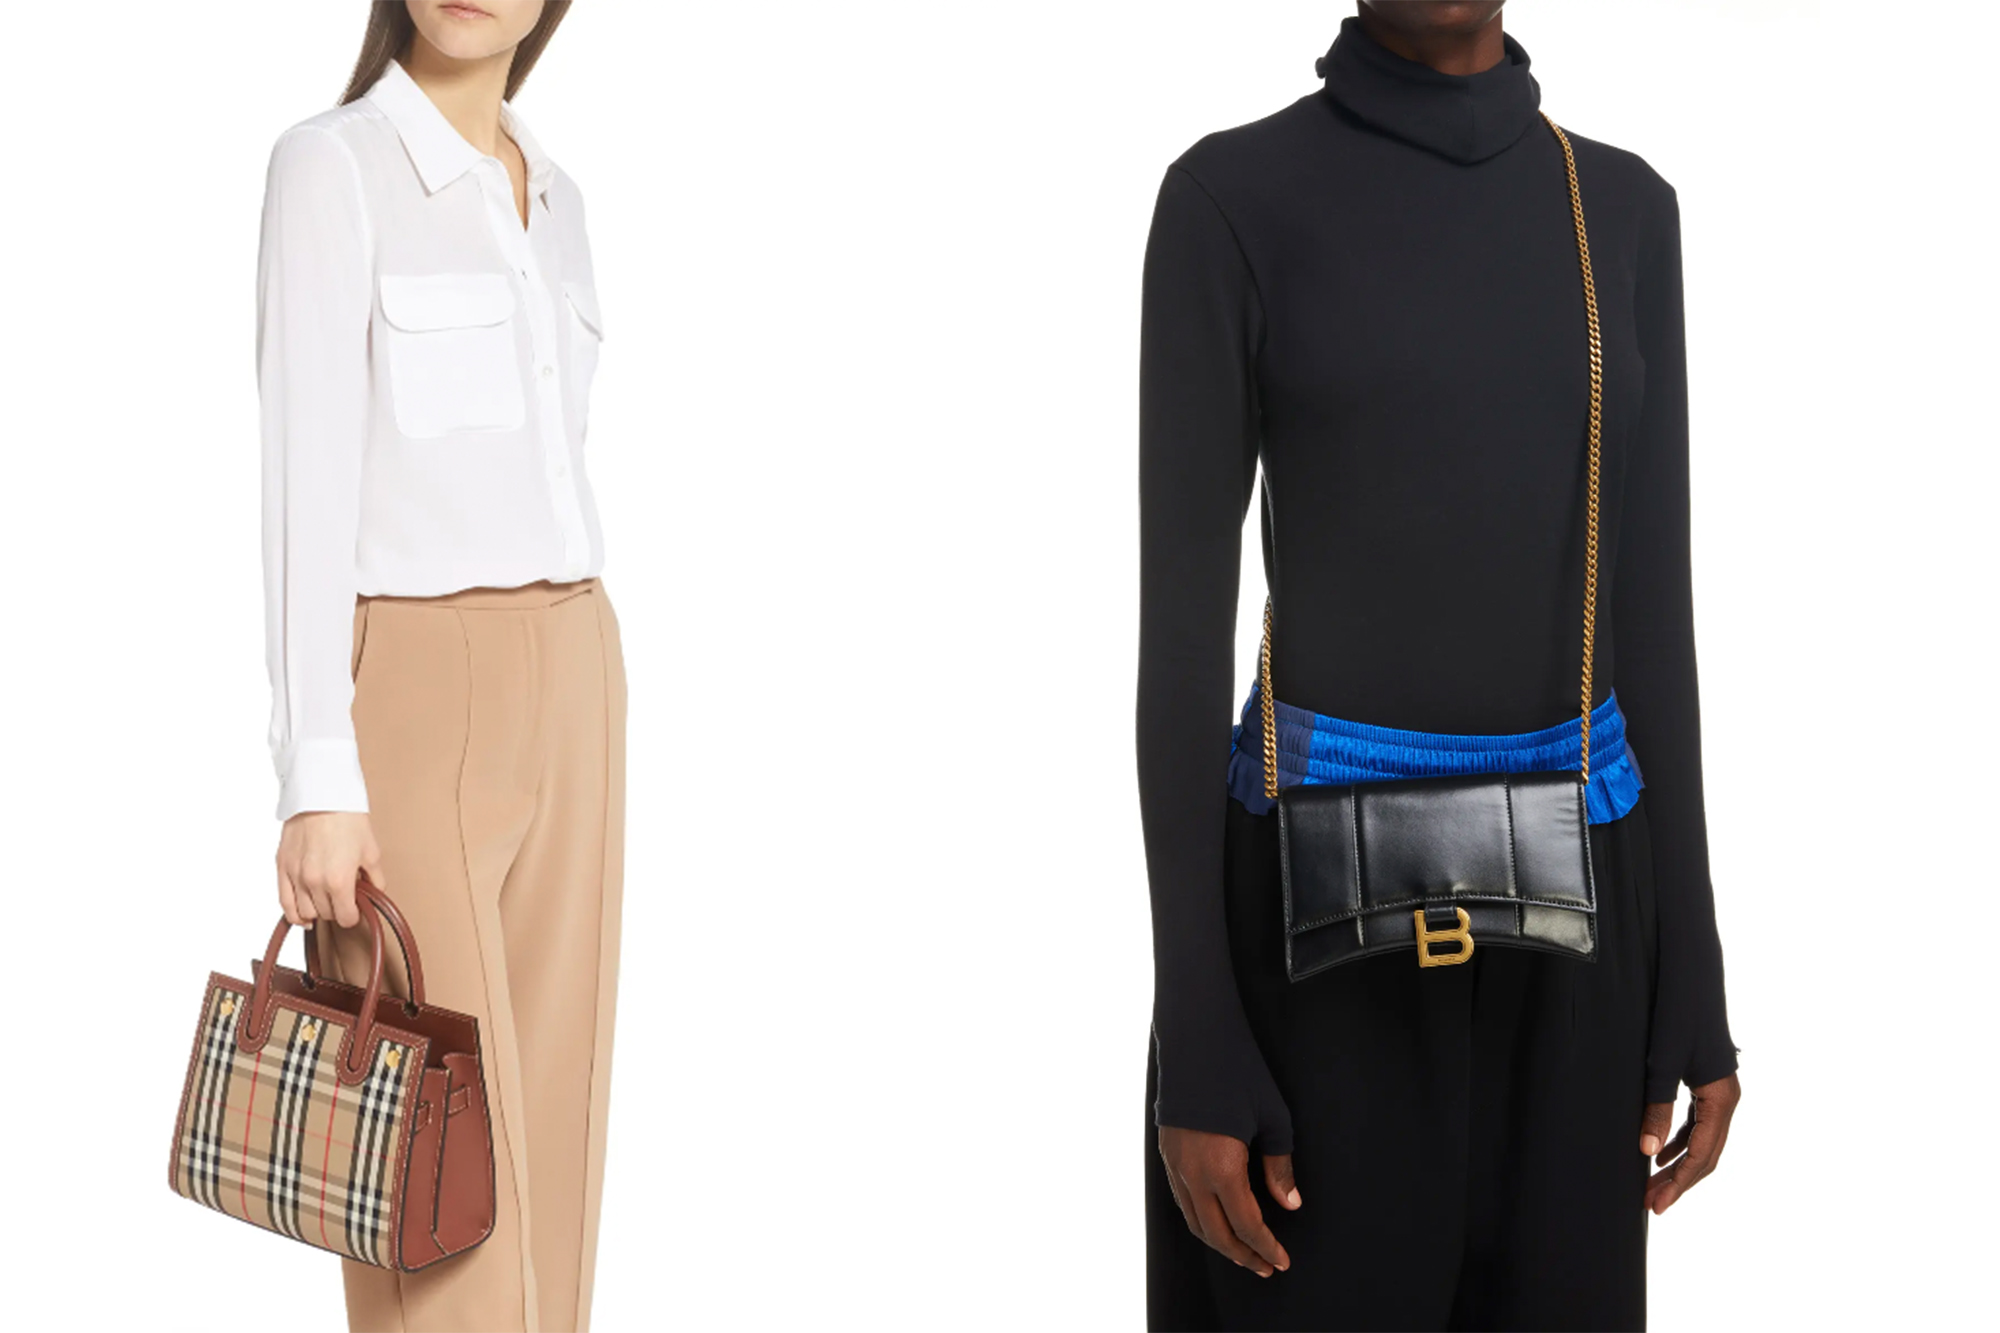 10 Best Designer Crossbody Bags to Shop in 2023 According to Experts